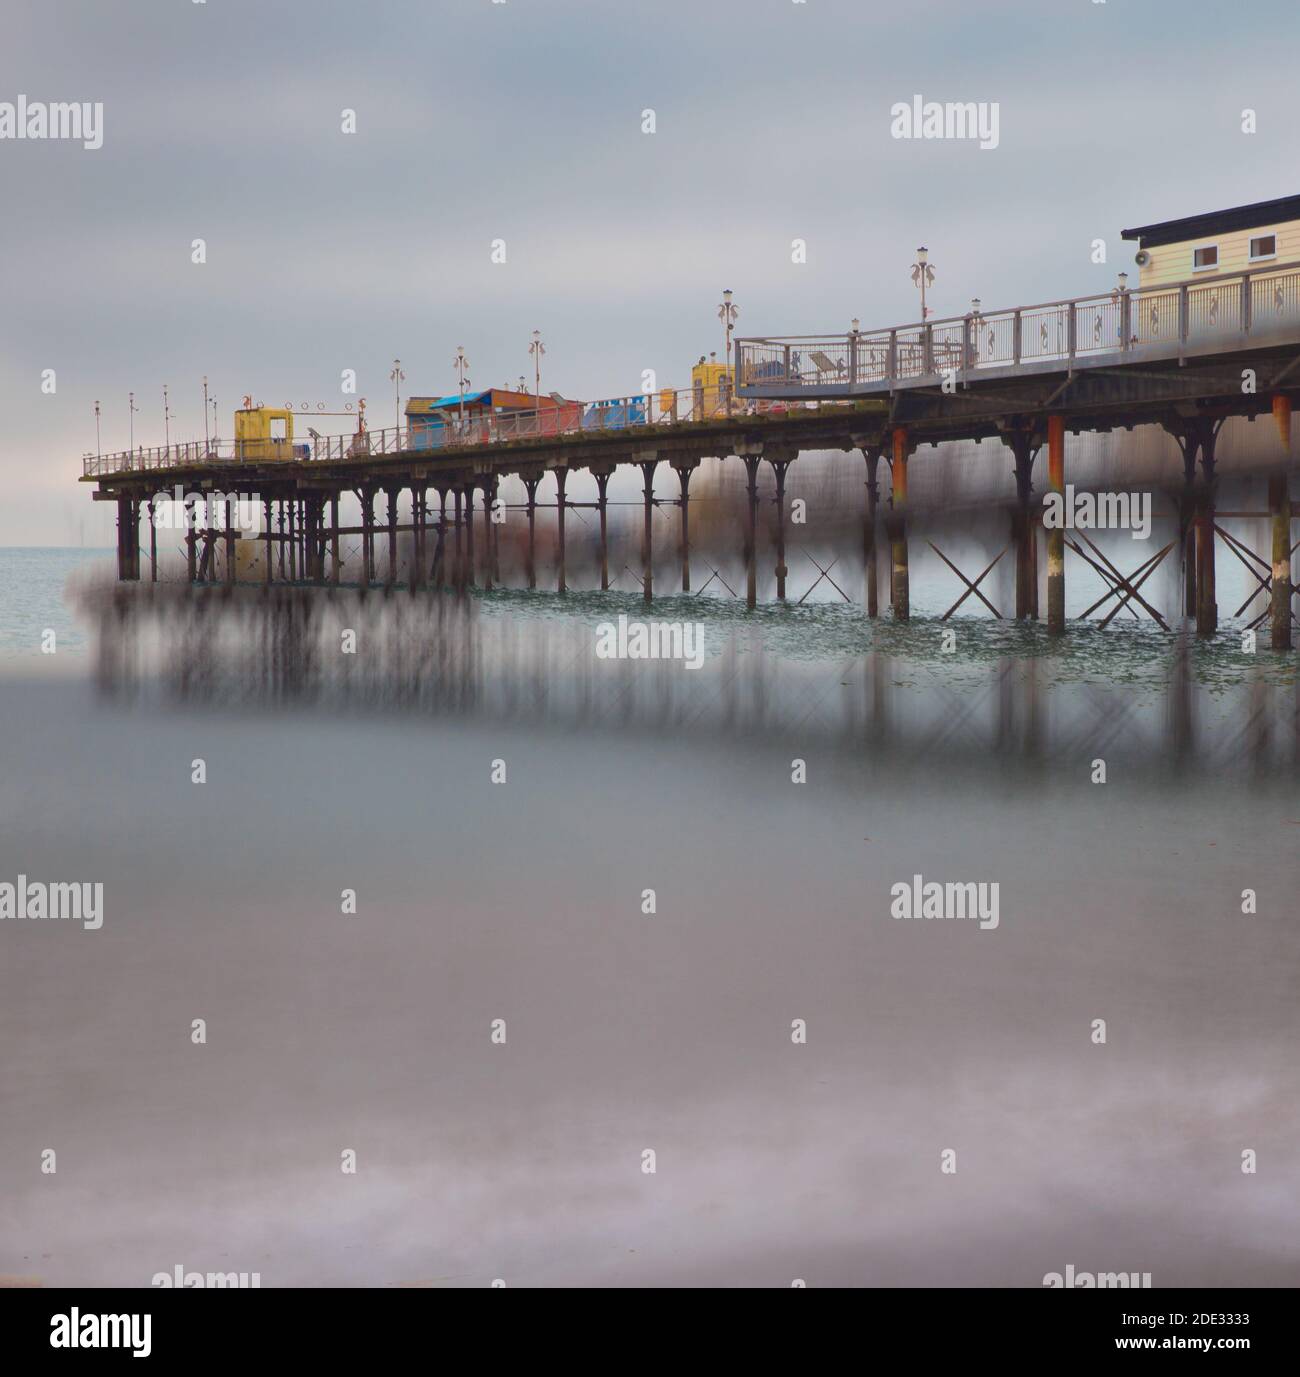 A long exposure of a Pier with reflections in the water. Stock Photo